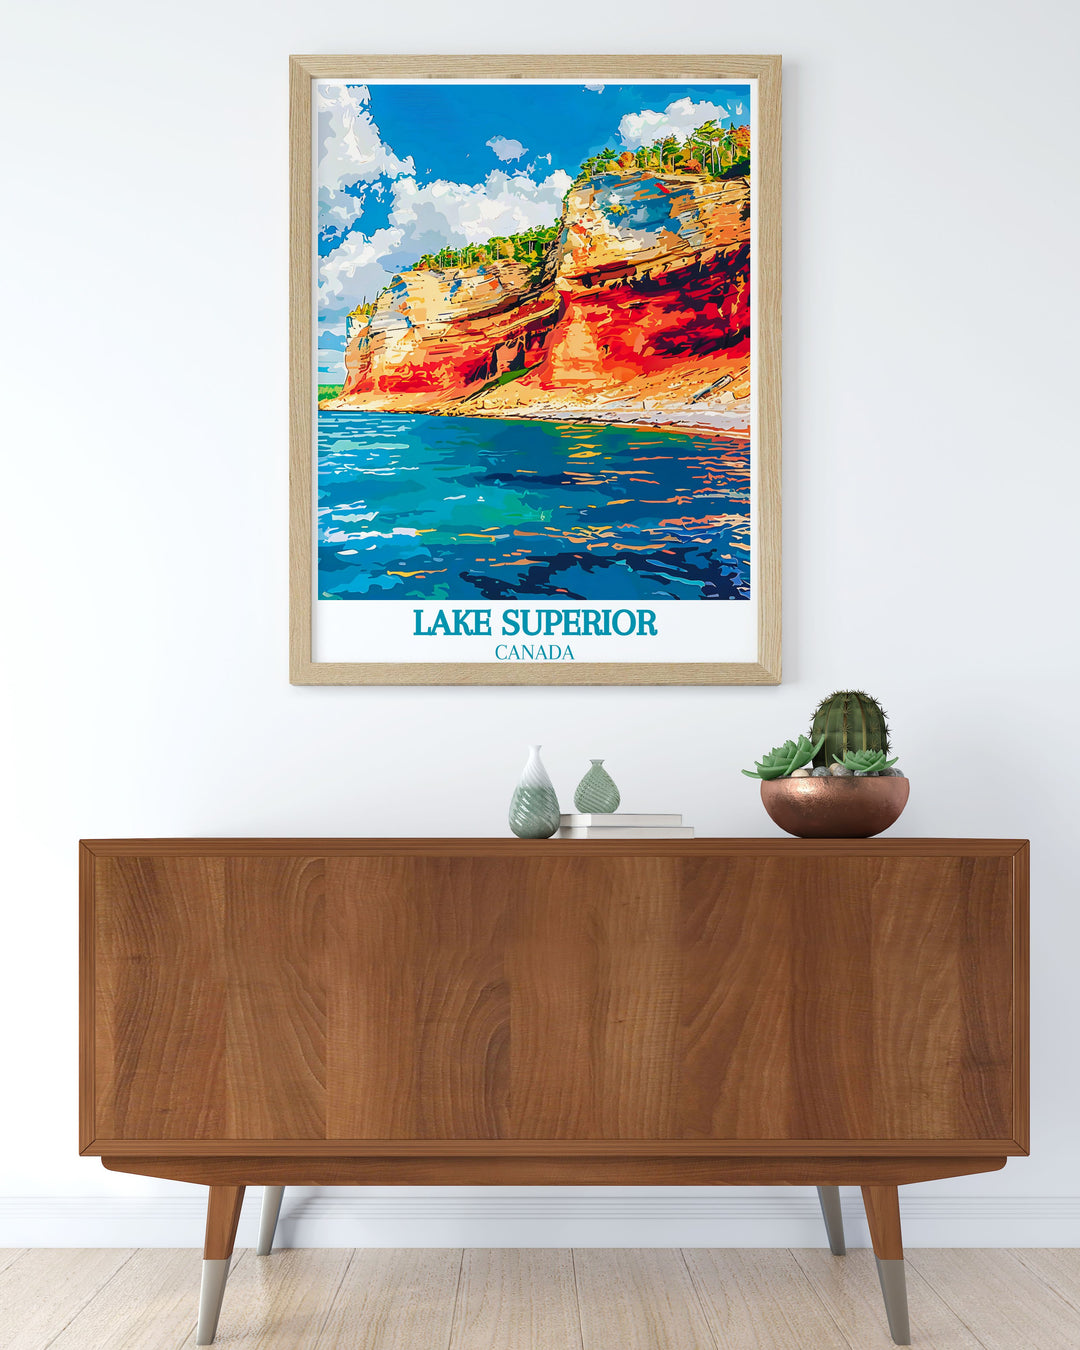 A detailed illustration of Lake Superior, highlighting its historical significance and natural beauty, a perfect addition to your home decor.